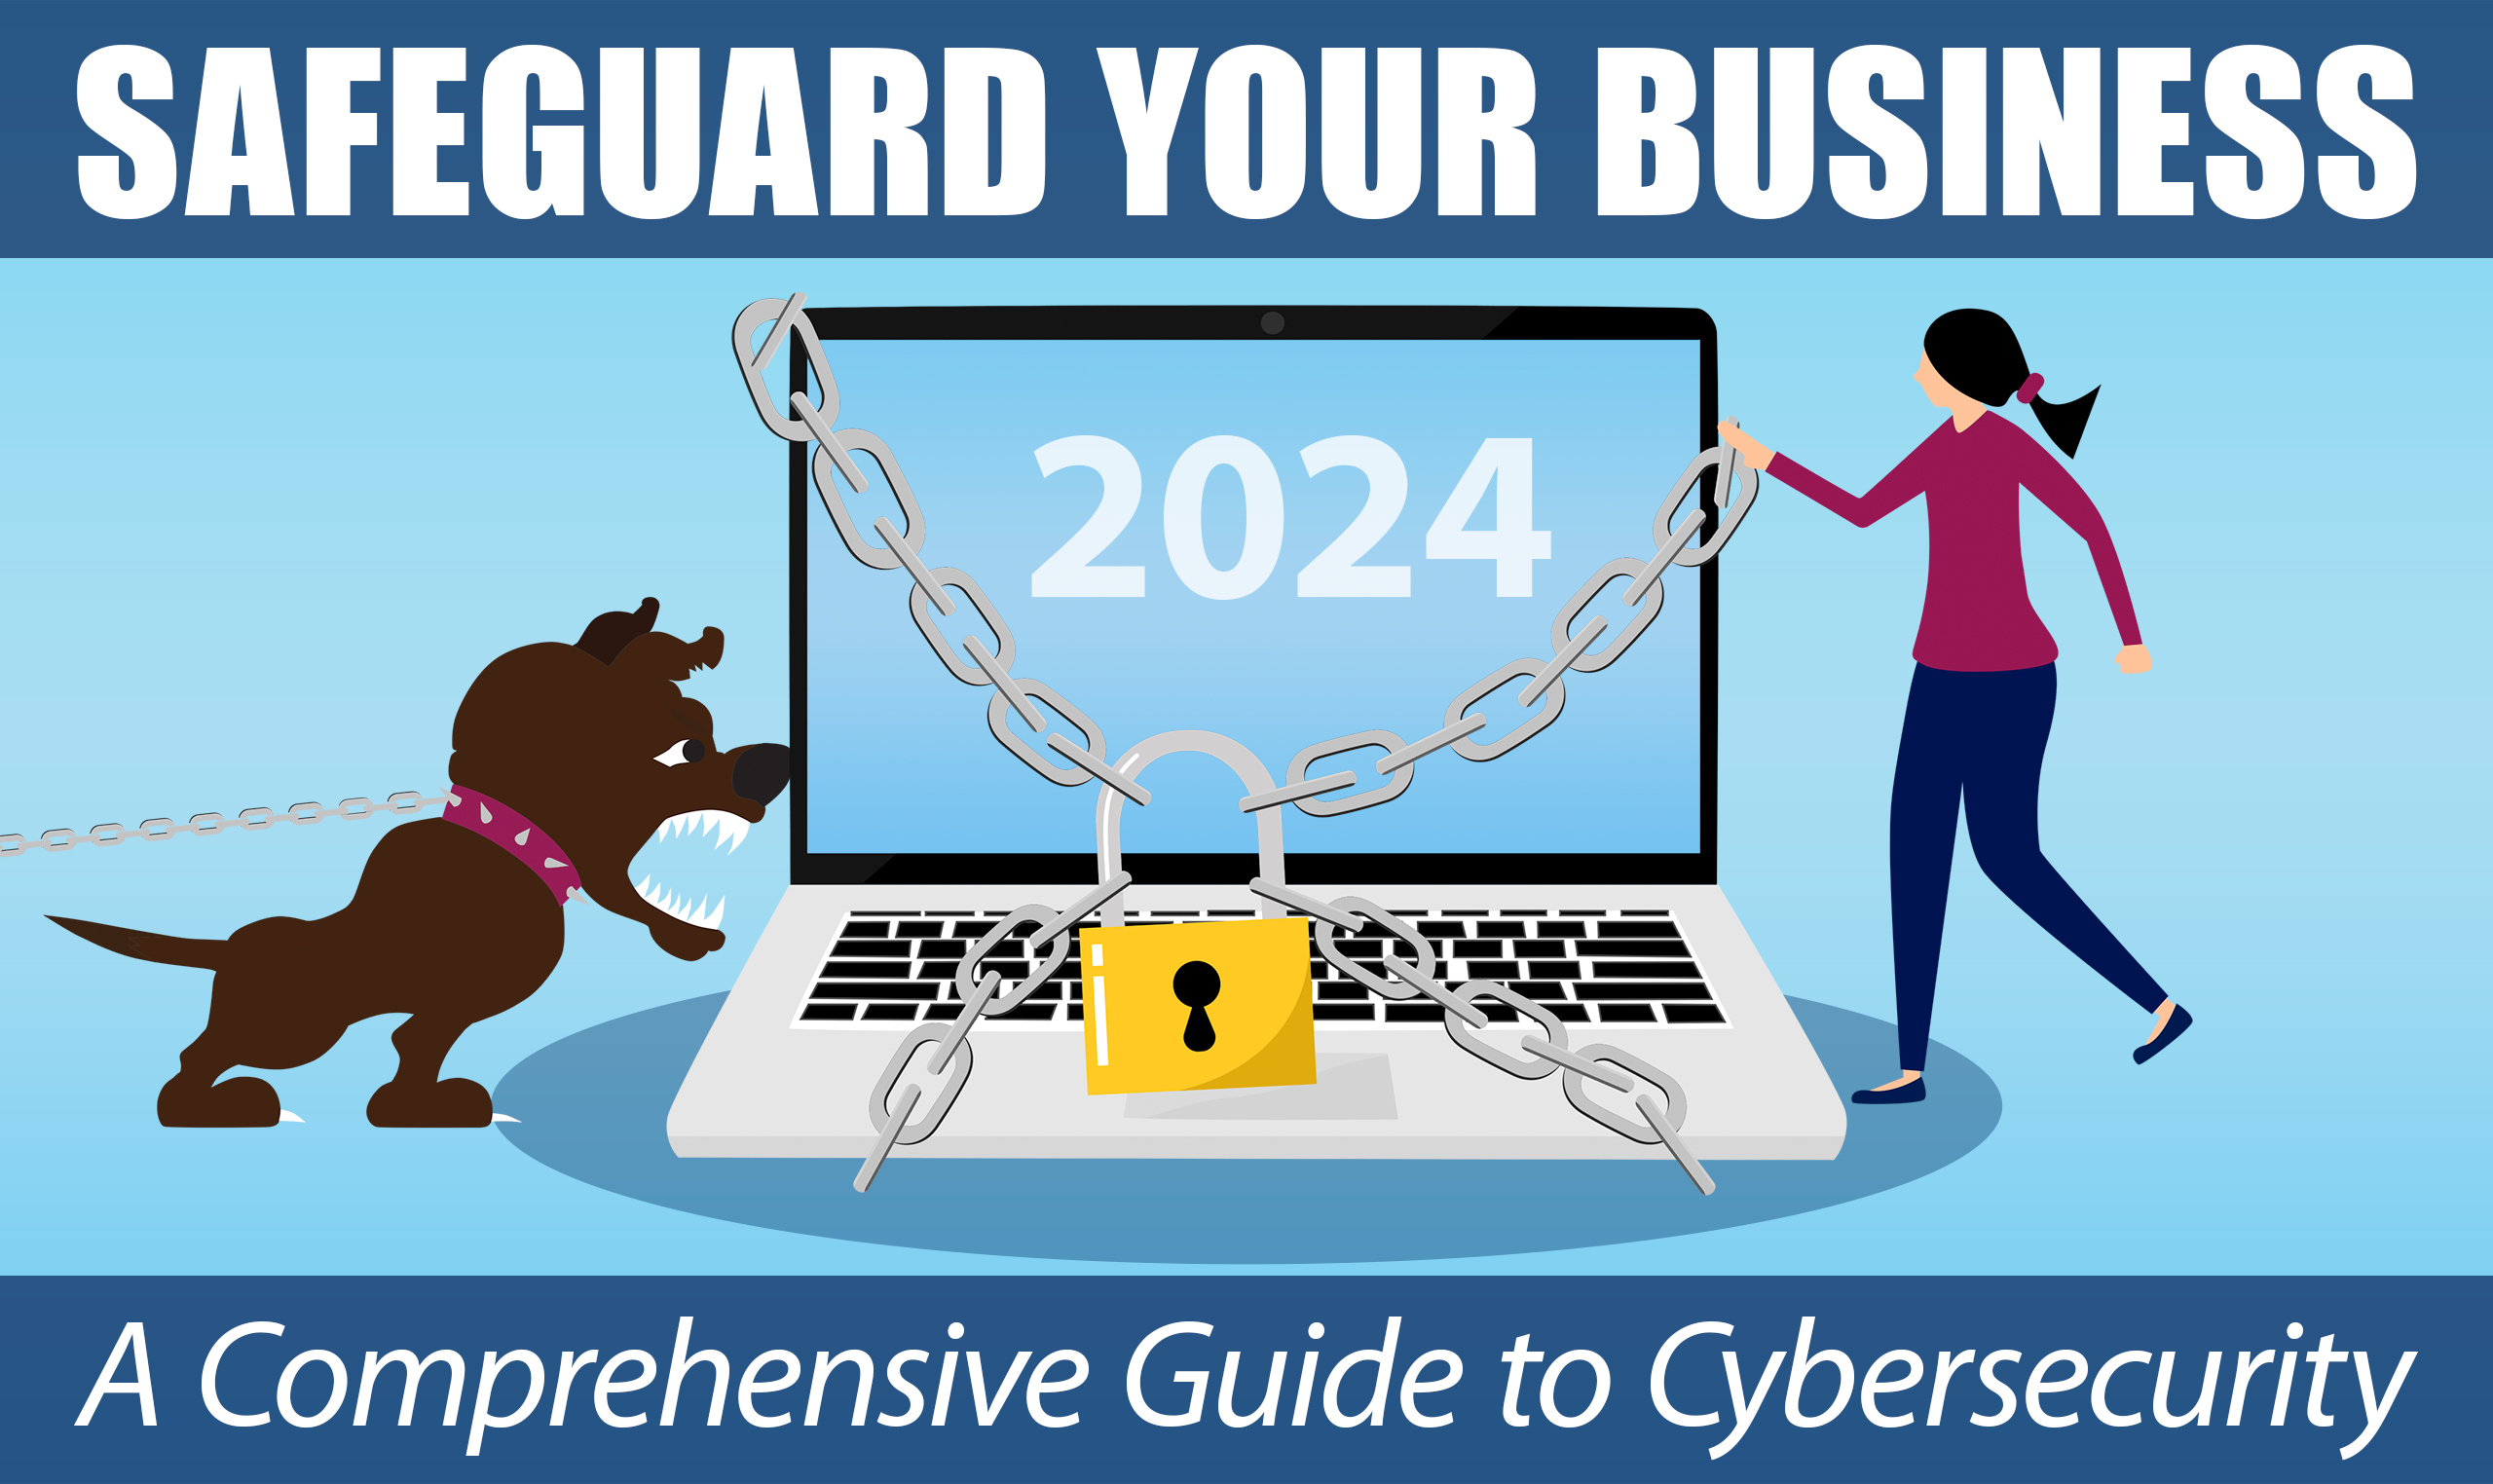 Safeguard Your Business in 2024: A Comprehensive Guide to Cybersecurity